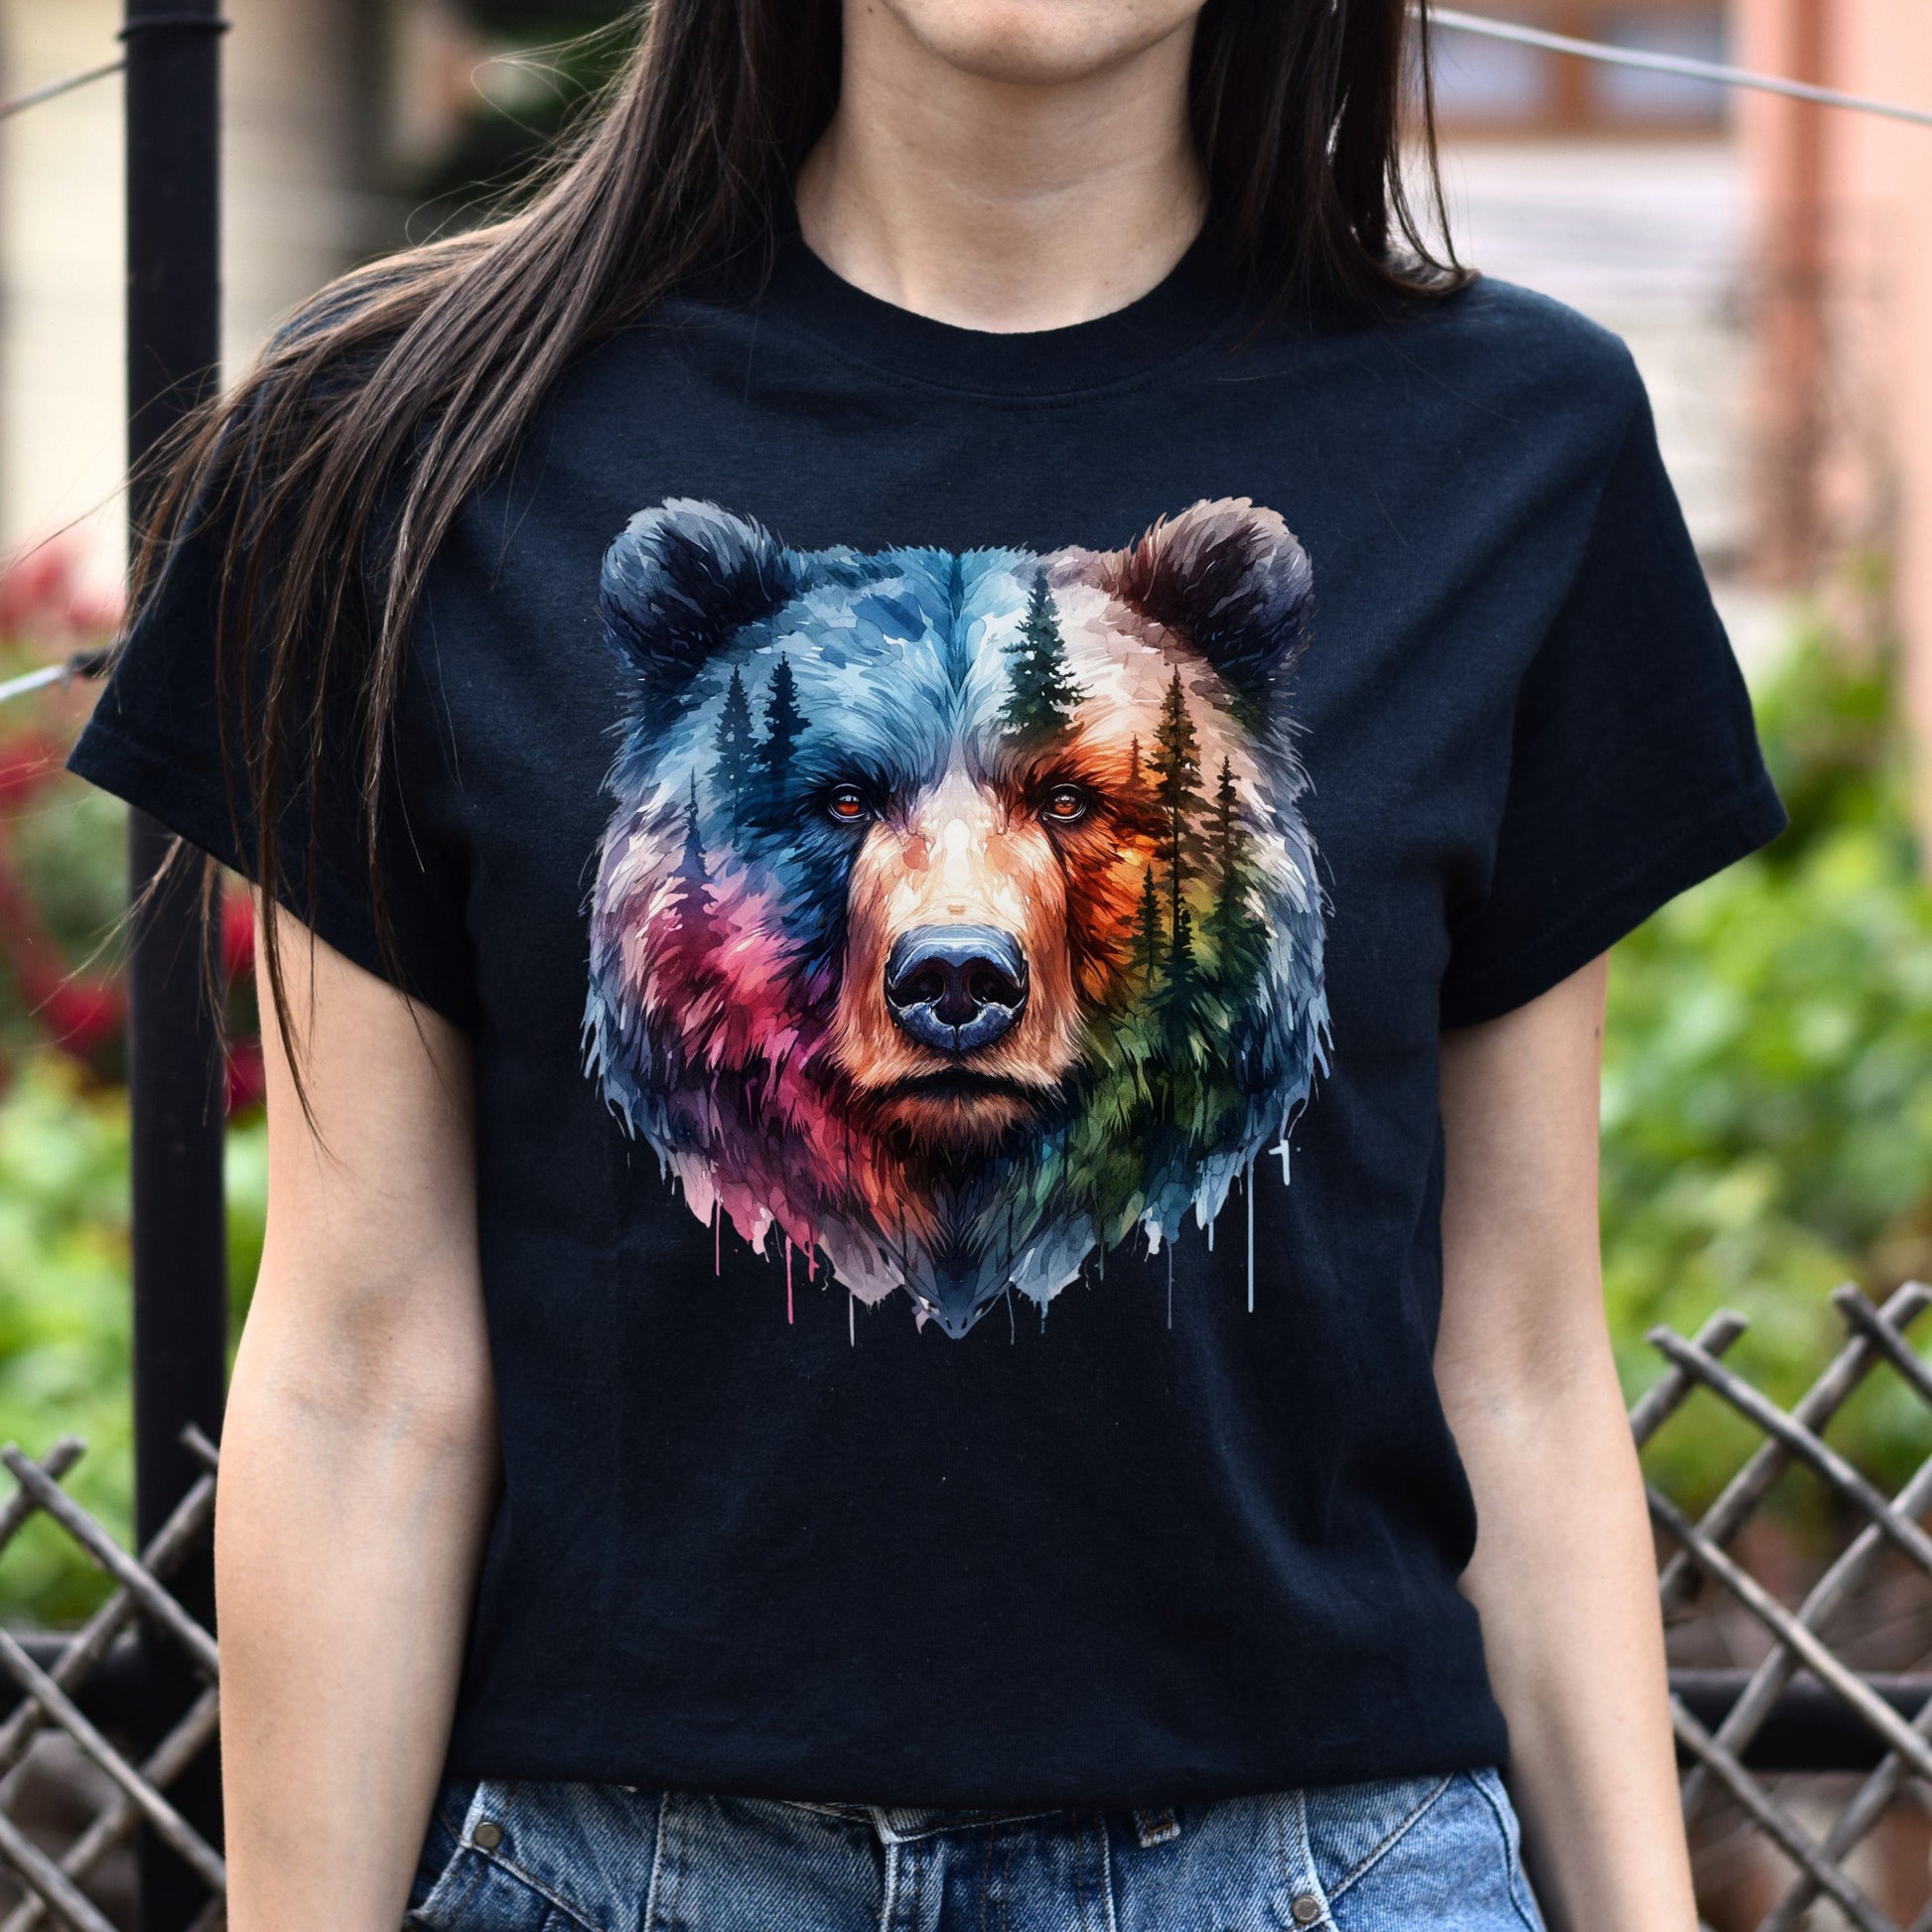 Grizzly and Forest Watercolor Unisex T-shirt Black Navy Dark Heather-Black-Family-Gift-Planet